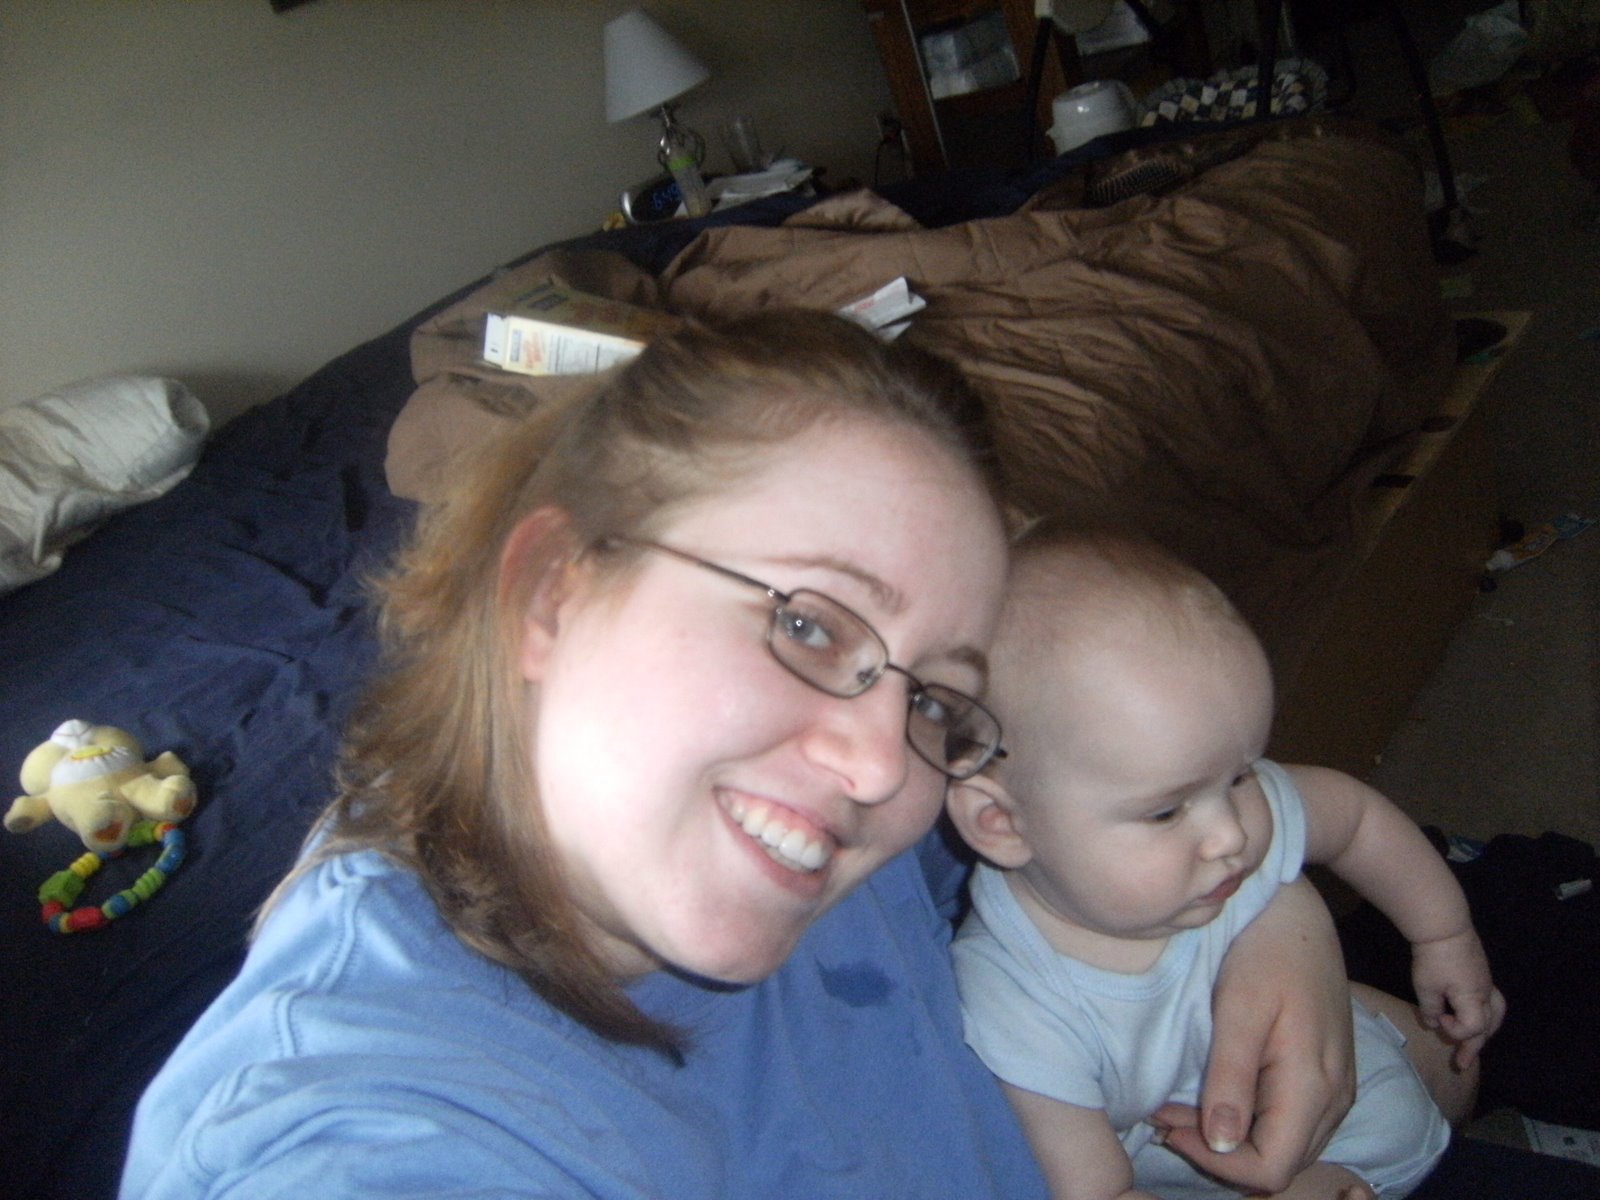 [Me+and+my+son+002.jpg]